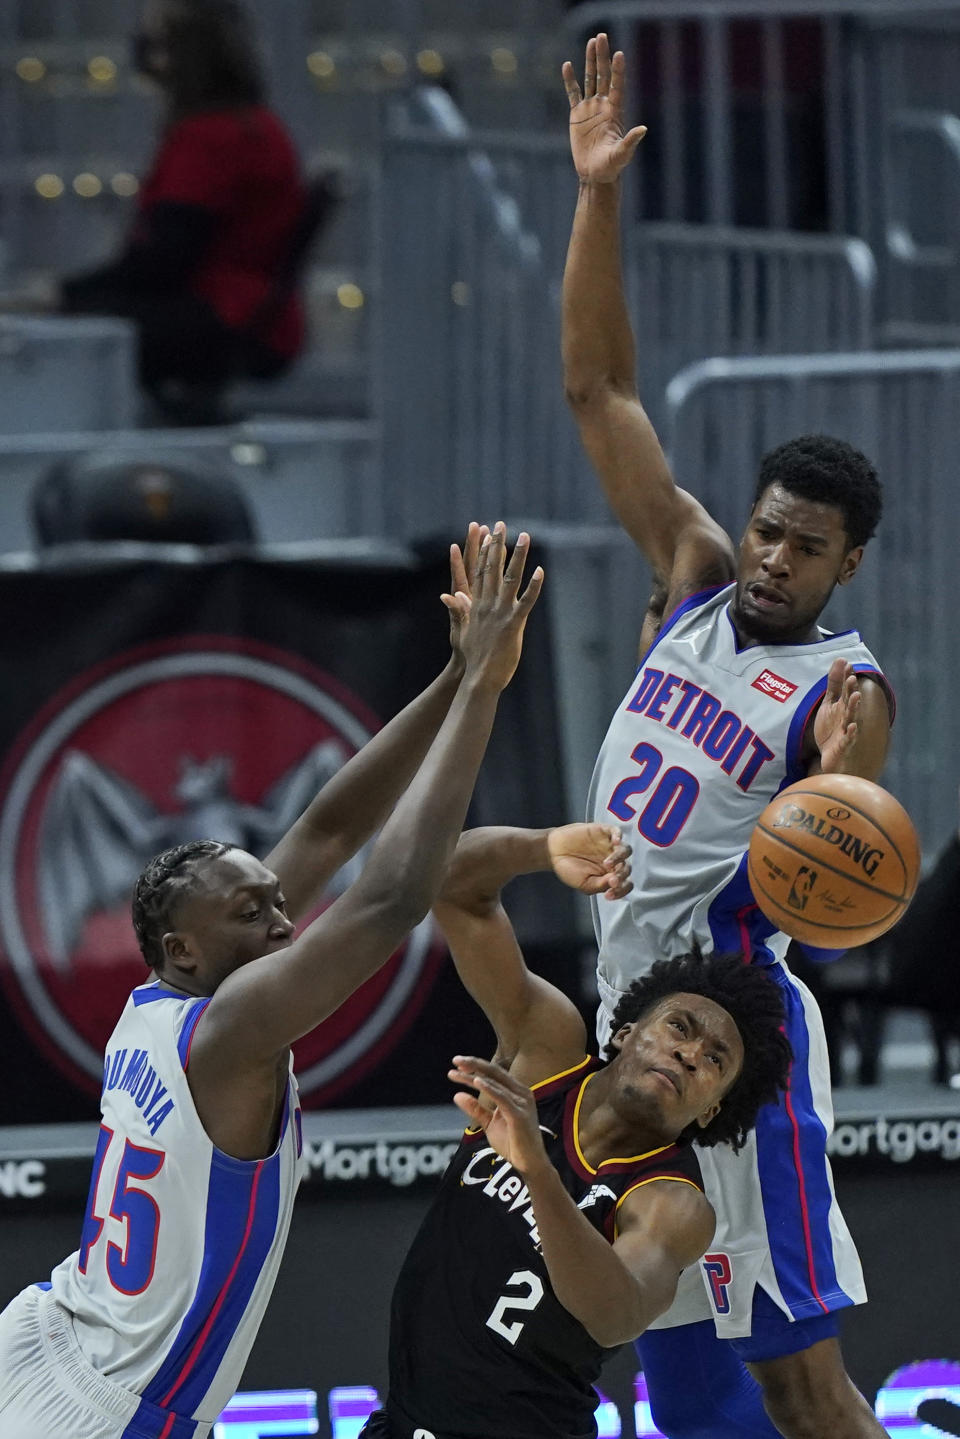 Cleveland Cavaliers' Collin Sexton, center, is stopped by Detroit Pistons' Sekou Doumbouya, left, and Josh Jackson in the second half of an NBA basketball game, Wednesday, Jan. 27, 2021, in Cleveland. The Cavaliers won 122-107. (AP Photo/Tony Dejak)